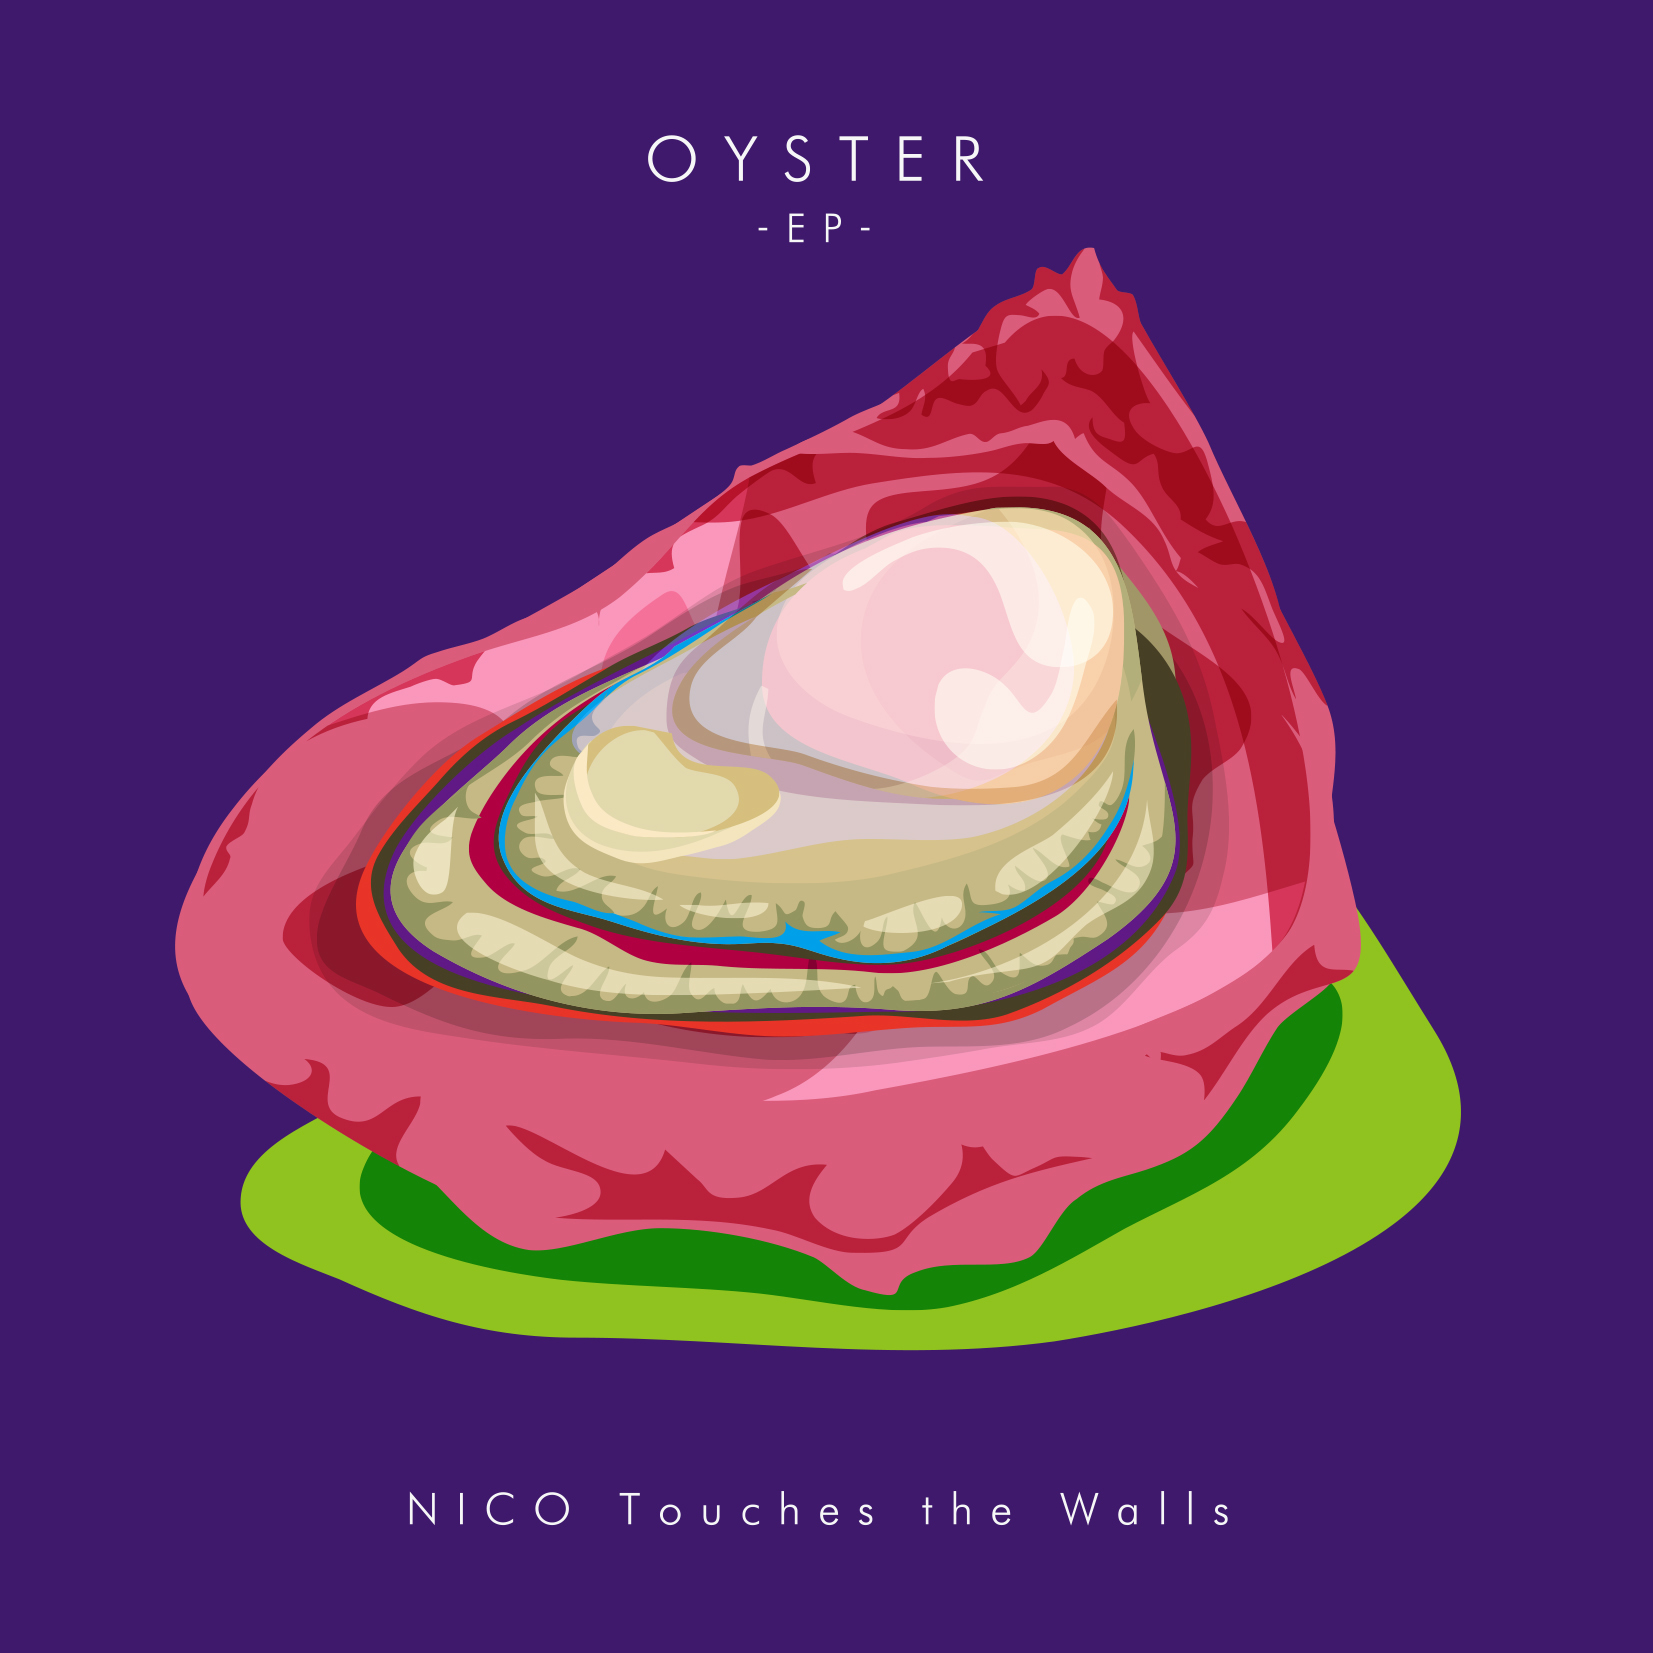 NICO Touches the Walls 『OYSTER -EP-』